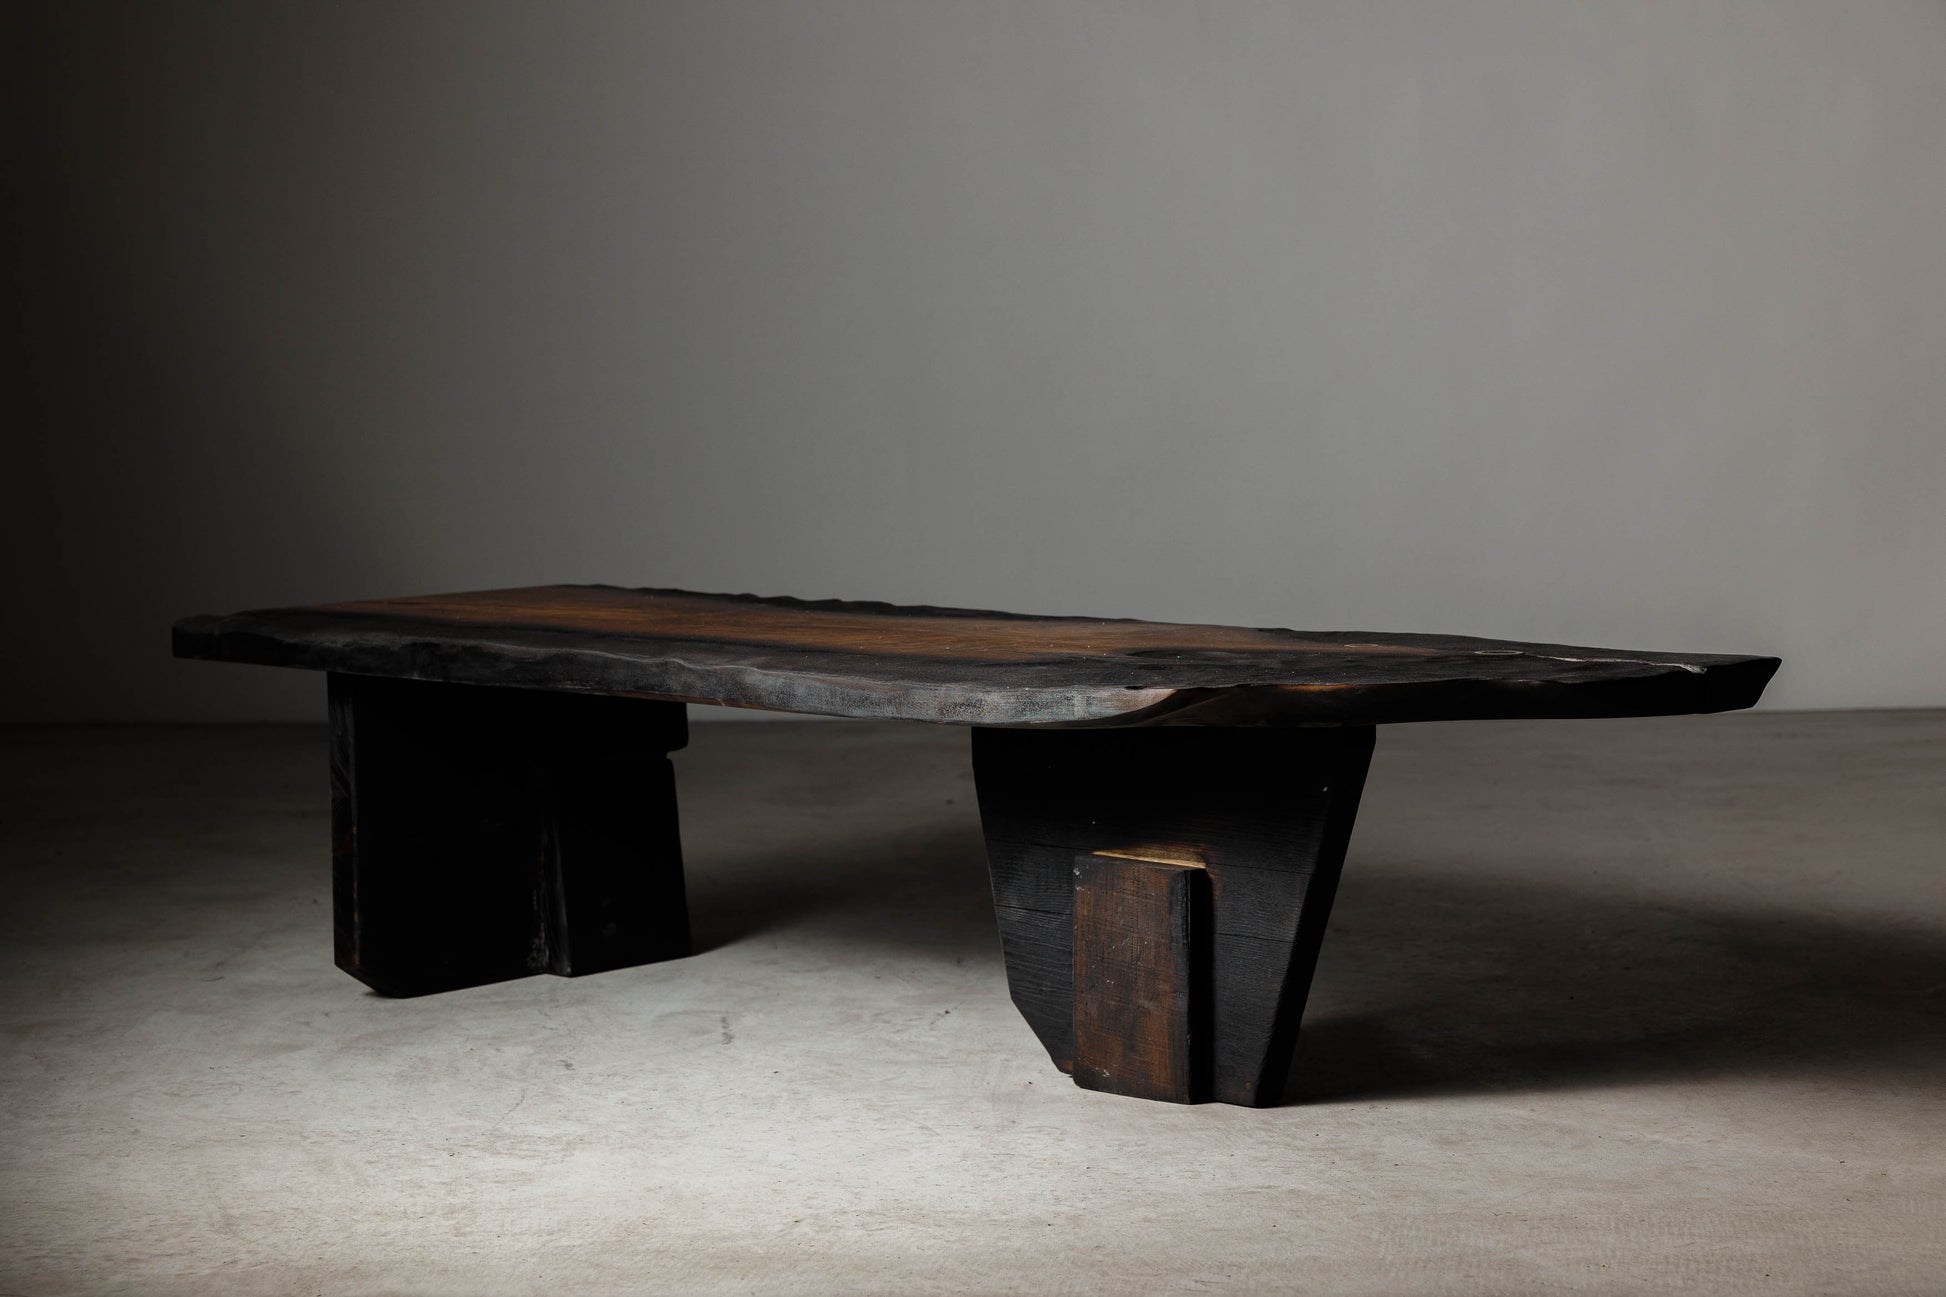 EM 107 Unique coffee table from the 18Brut collection, picture of the whole table showing the texture and geometry. 